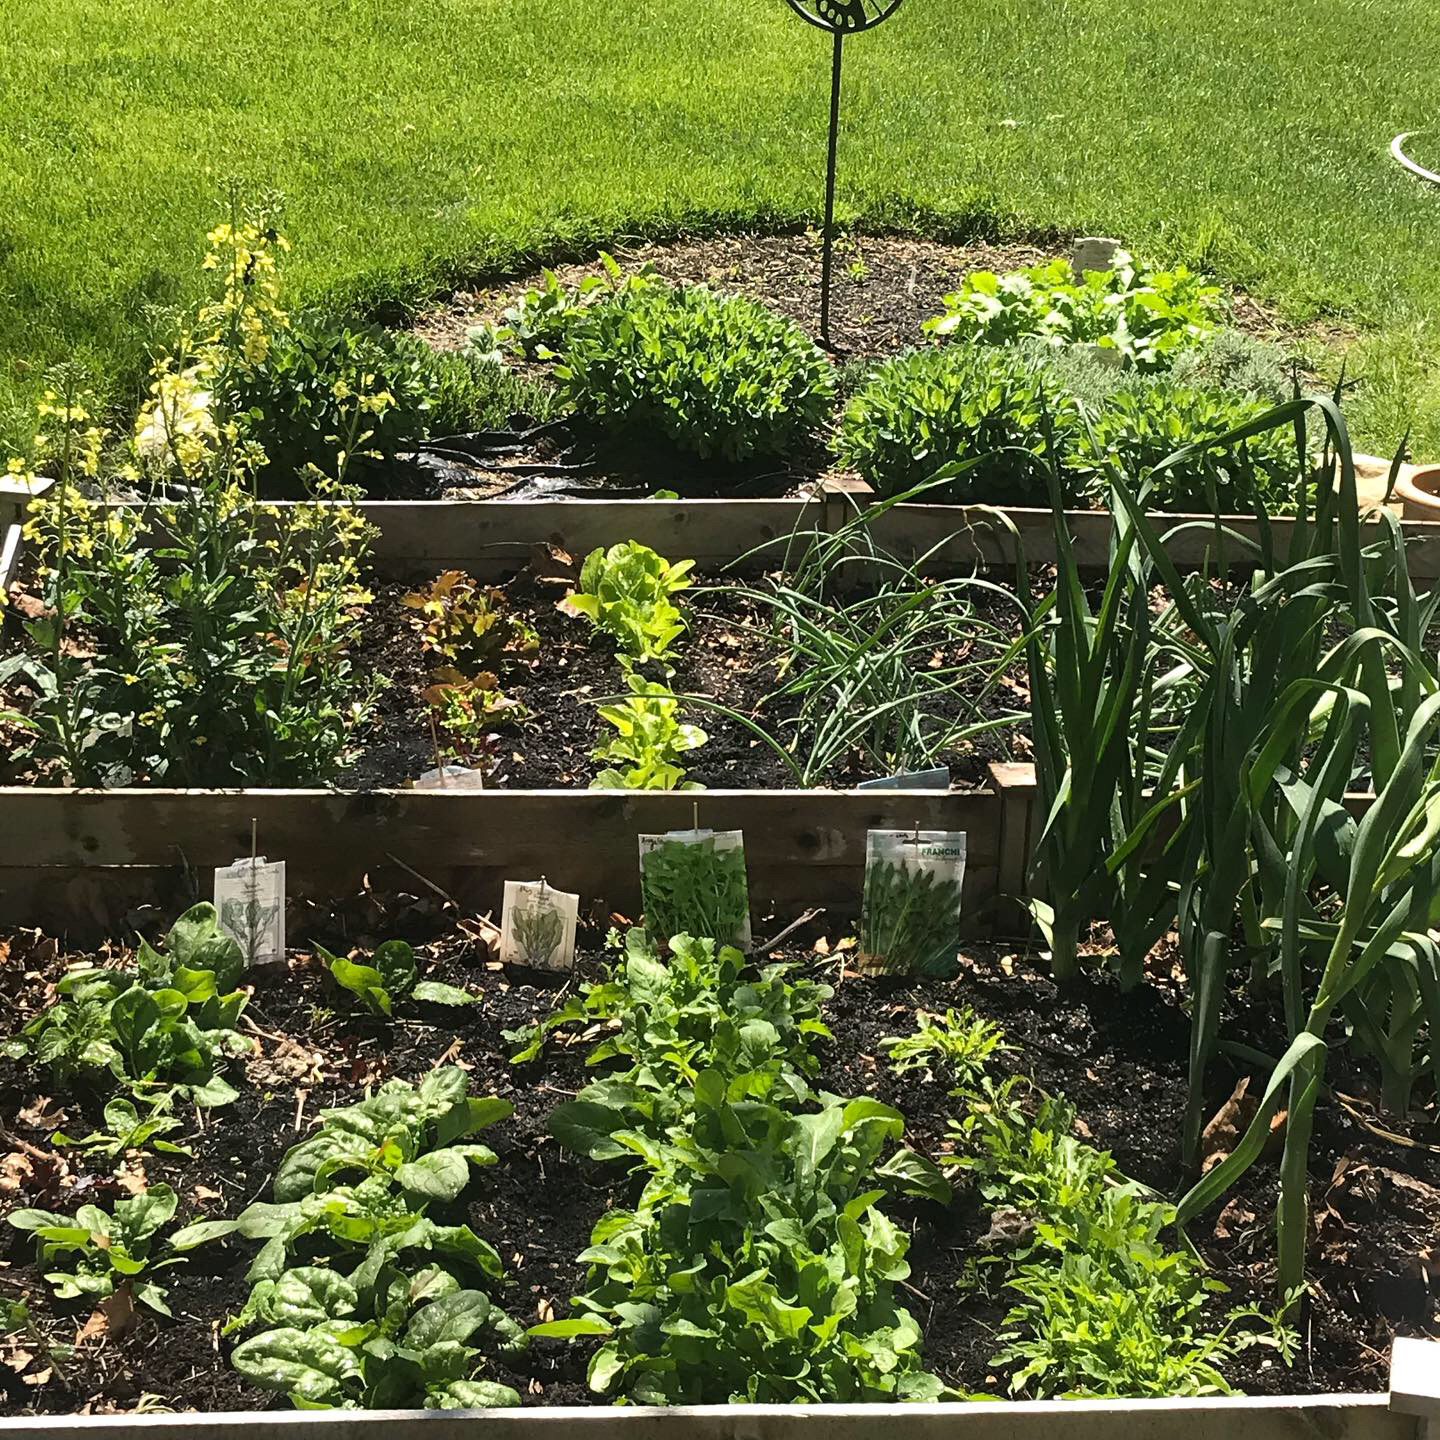 Raised garden bed with rows of spinach, arugula, leeks in the foreground and lettuces and onion sets in the back. Broccoli rabe growing in the ground behind the beds.